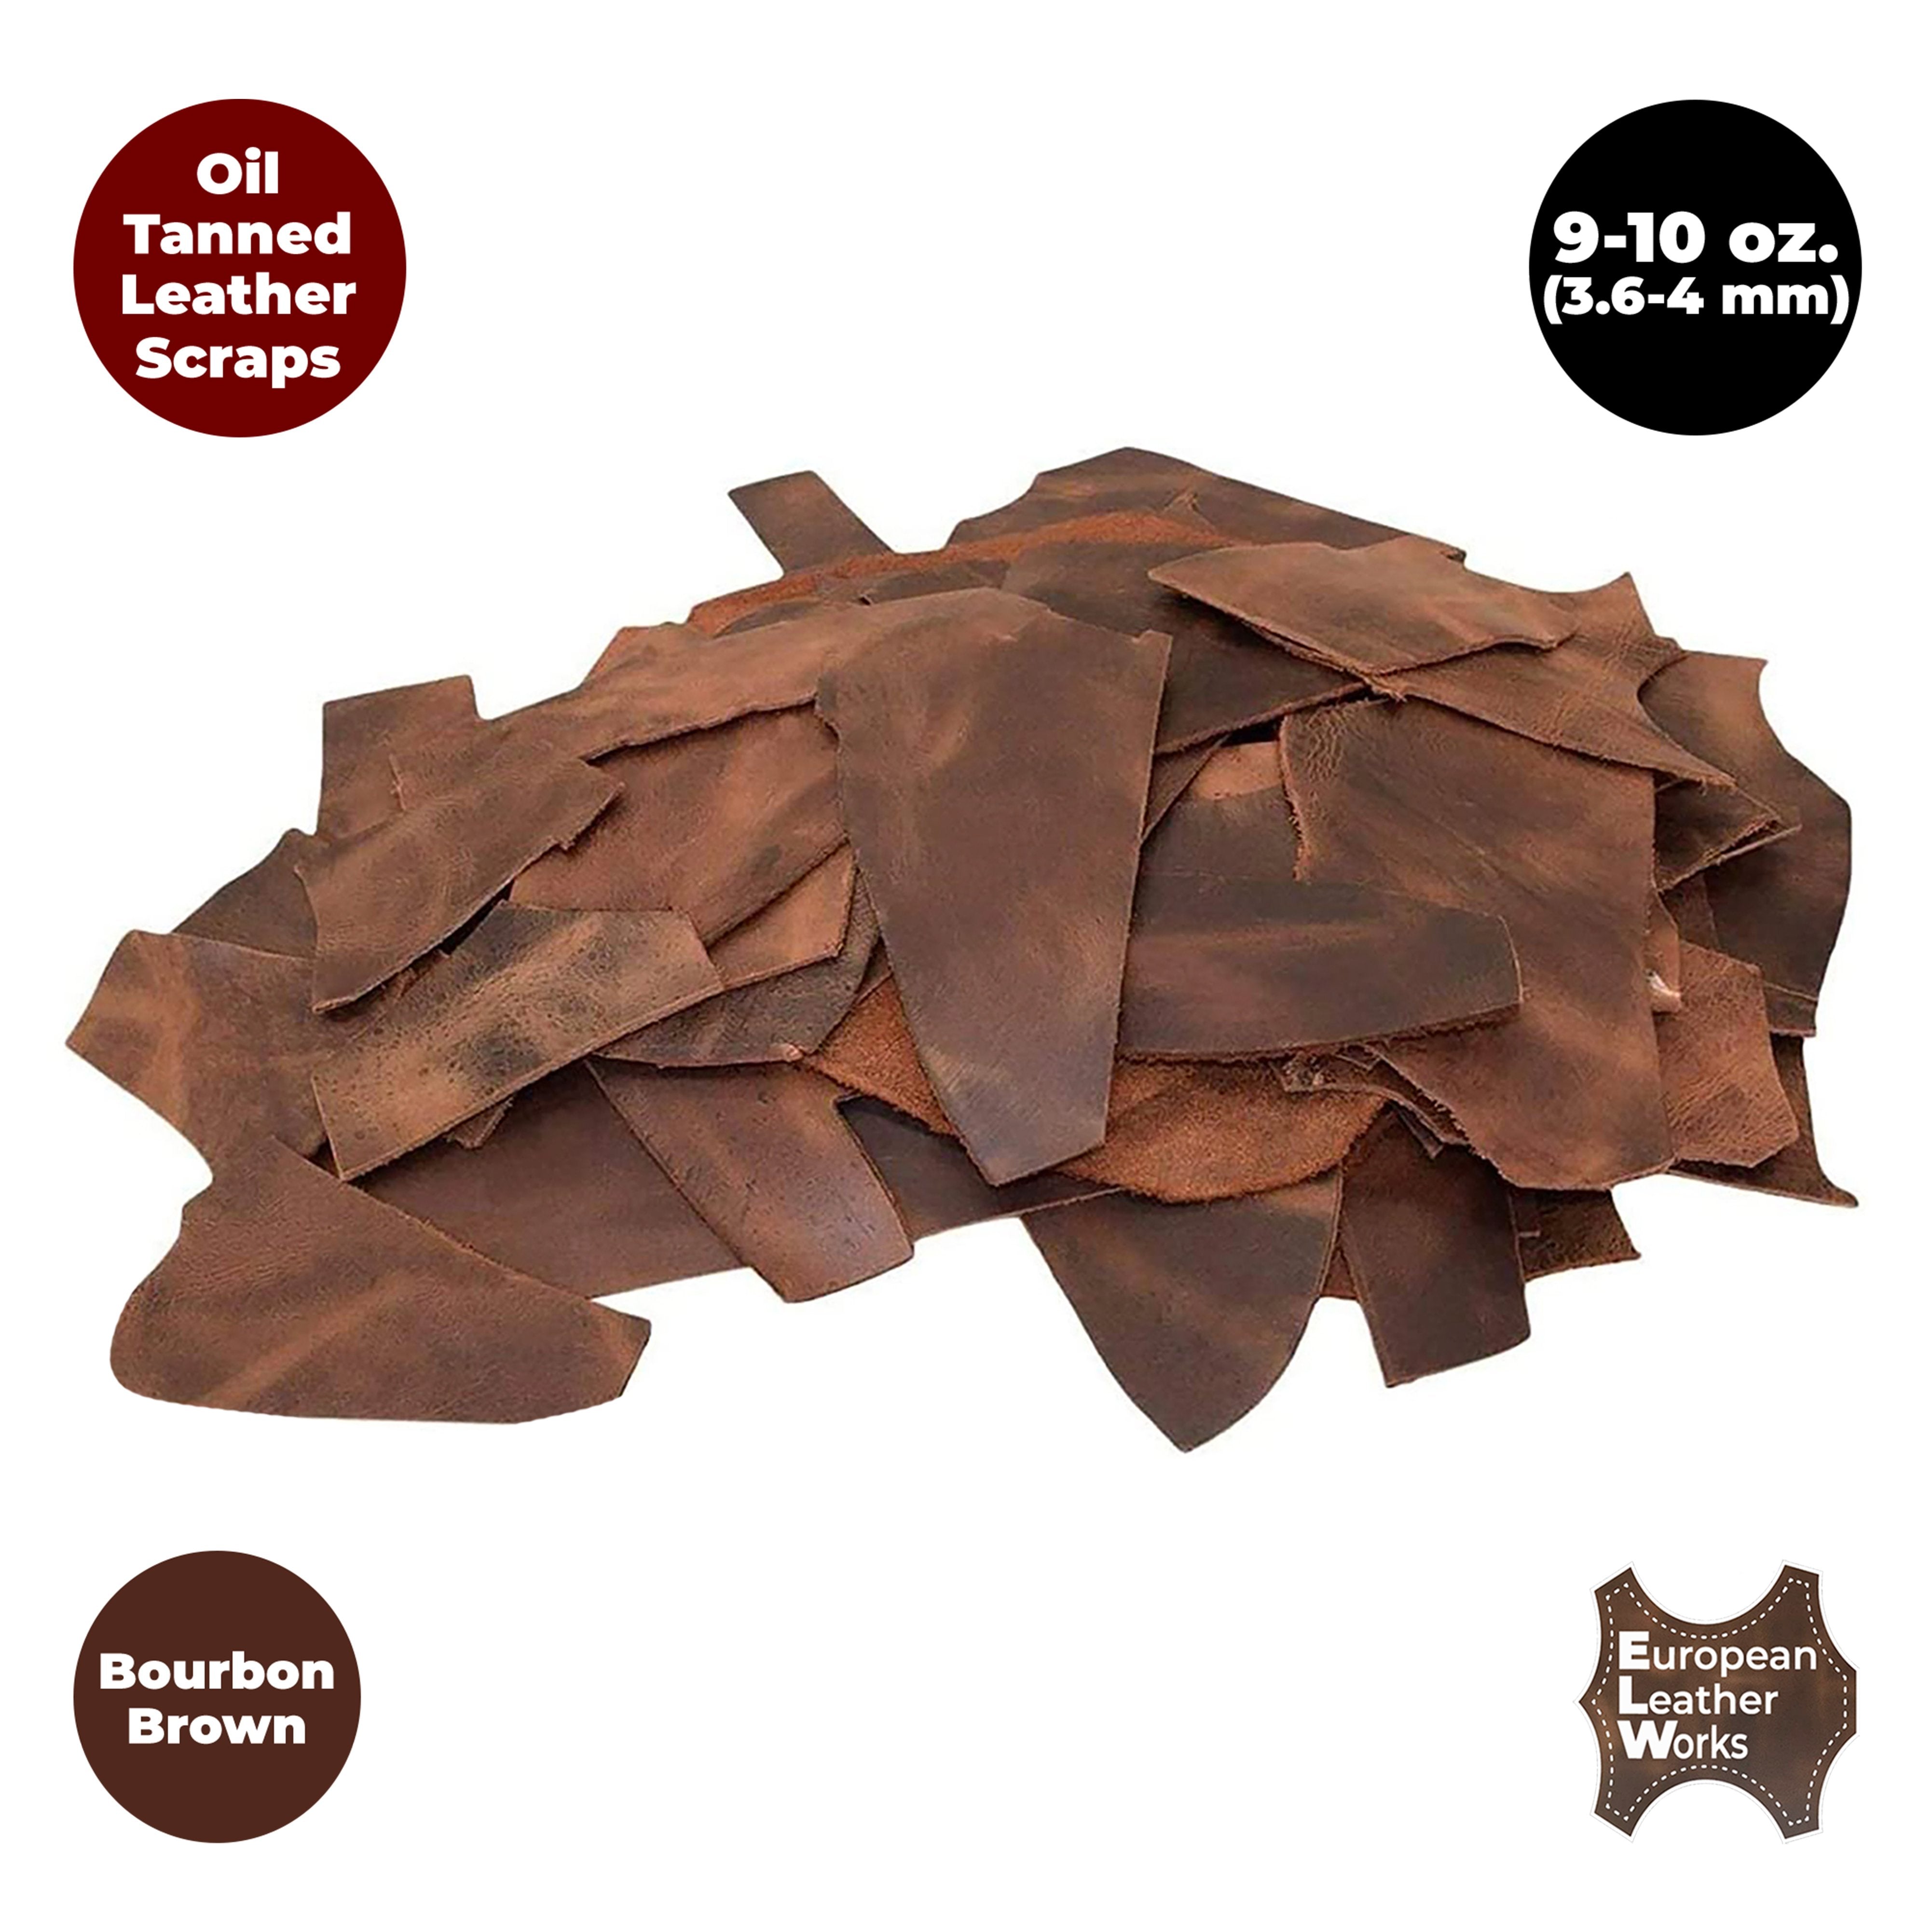 European Leather Work 5-6 oz. (2-2.4mm) Vegetable Tanned Leather